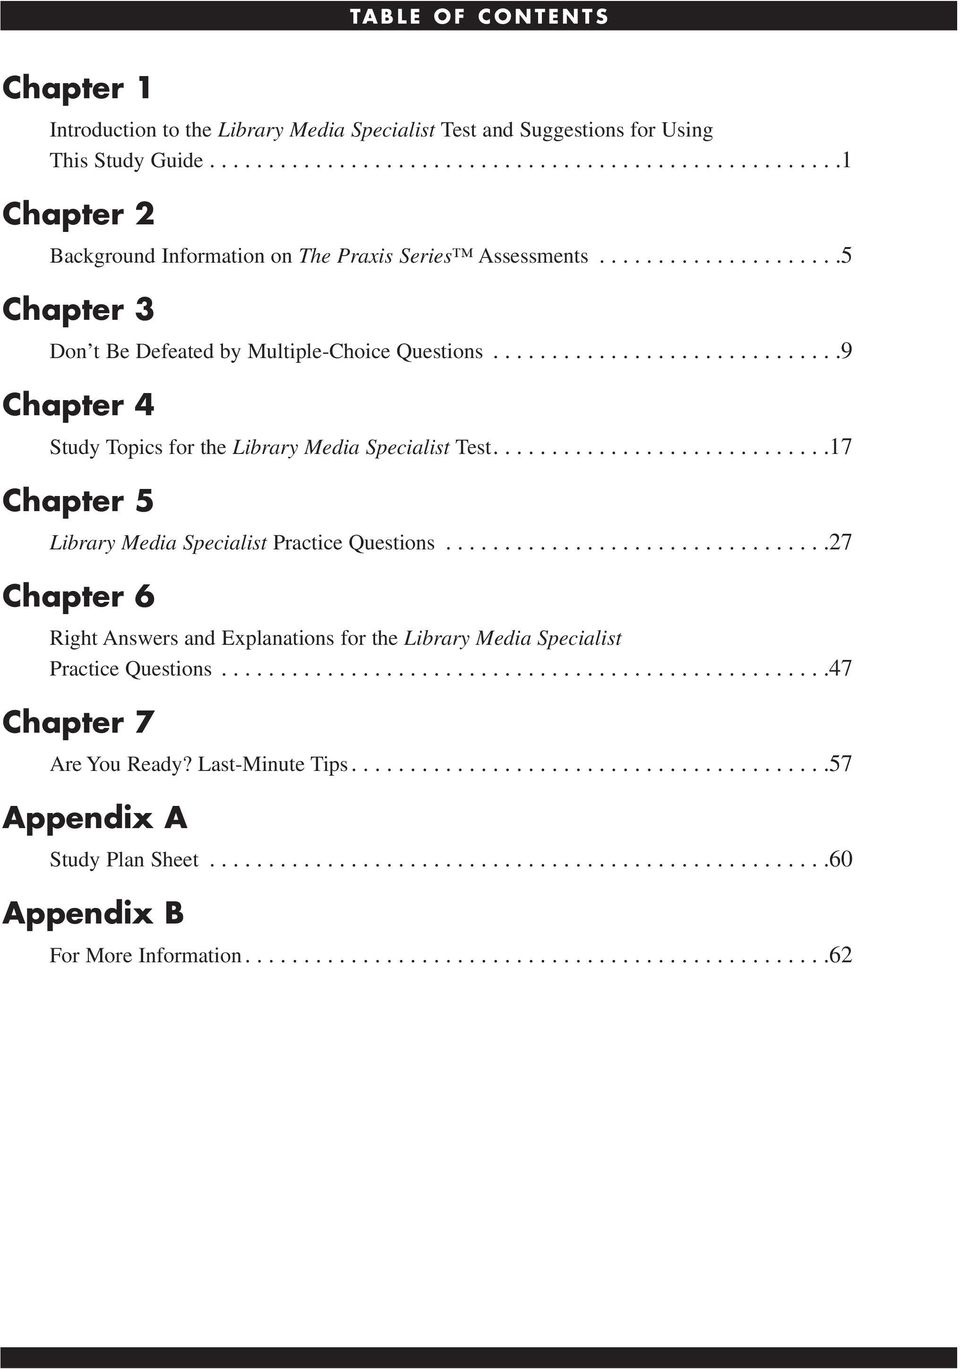 ............................17 Chapter 5 Library Media Specialist Practice Questions.................................27 Chapter 6 Right Answers and Explanations for the Library Media Specialist Practice Questions.